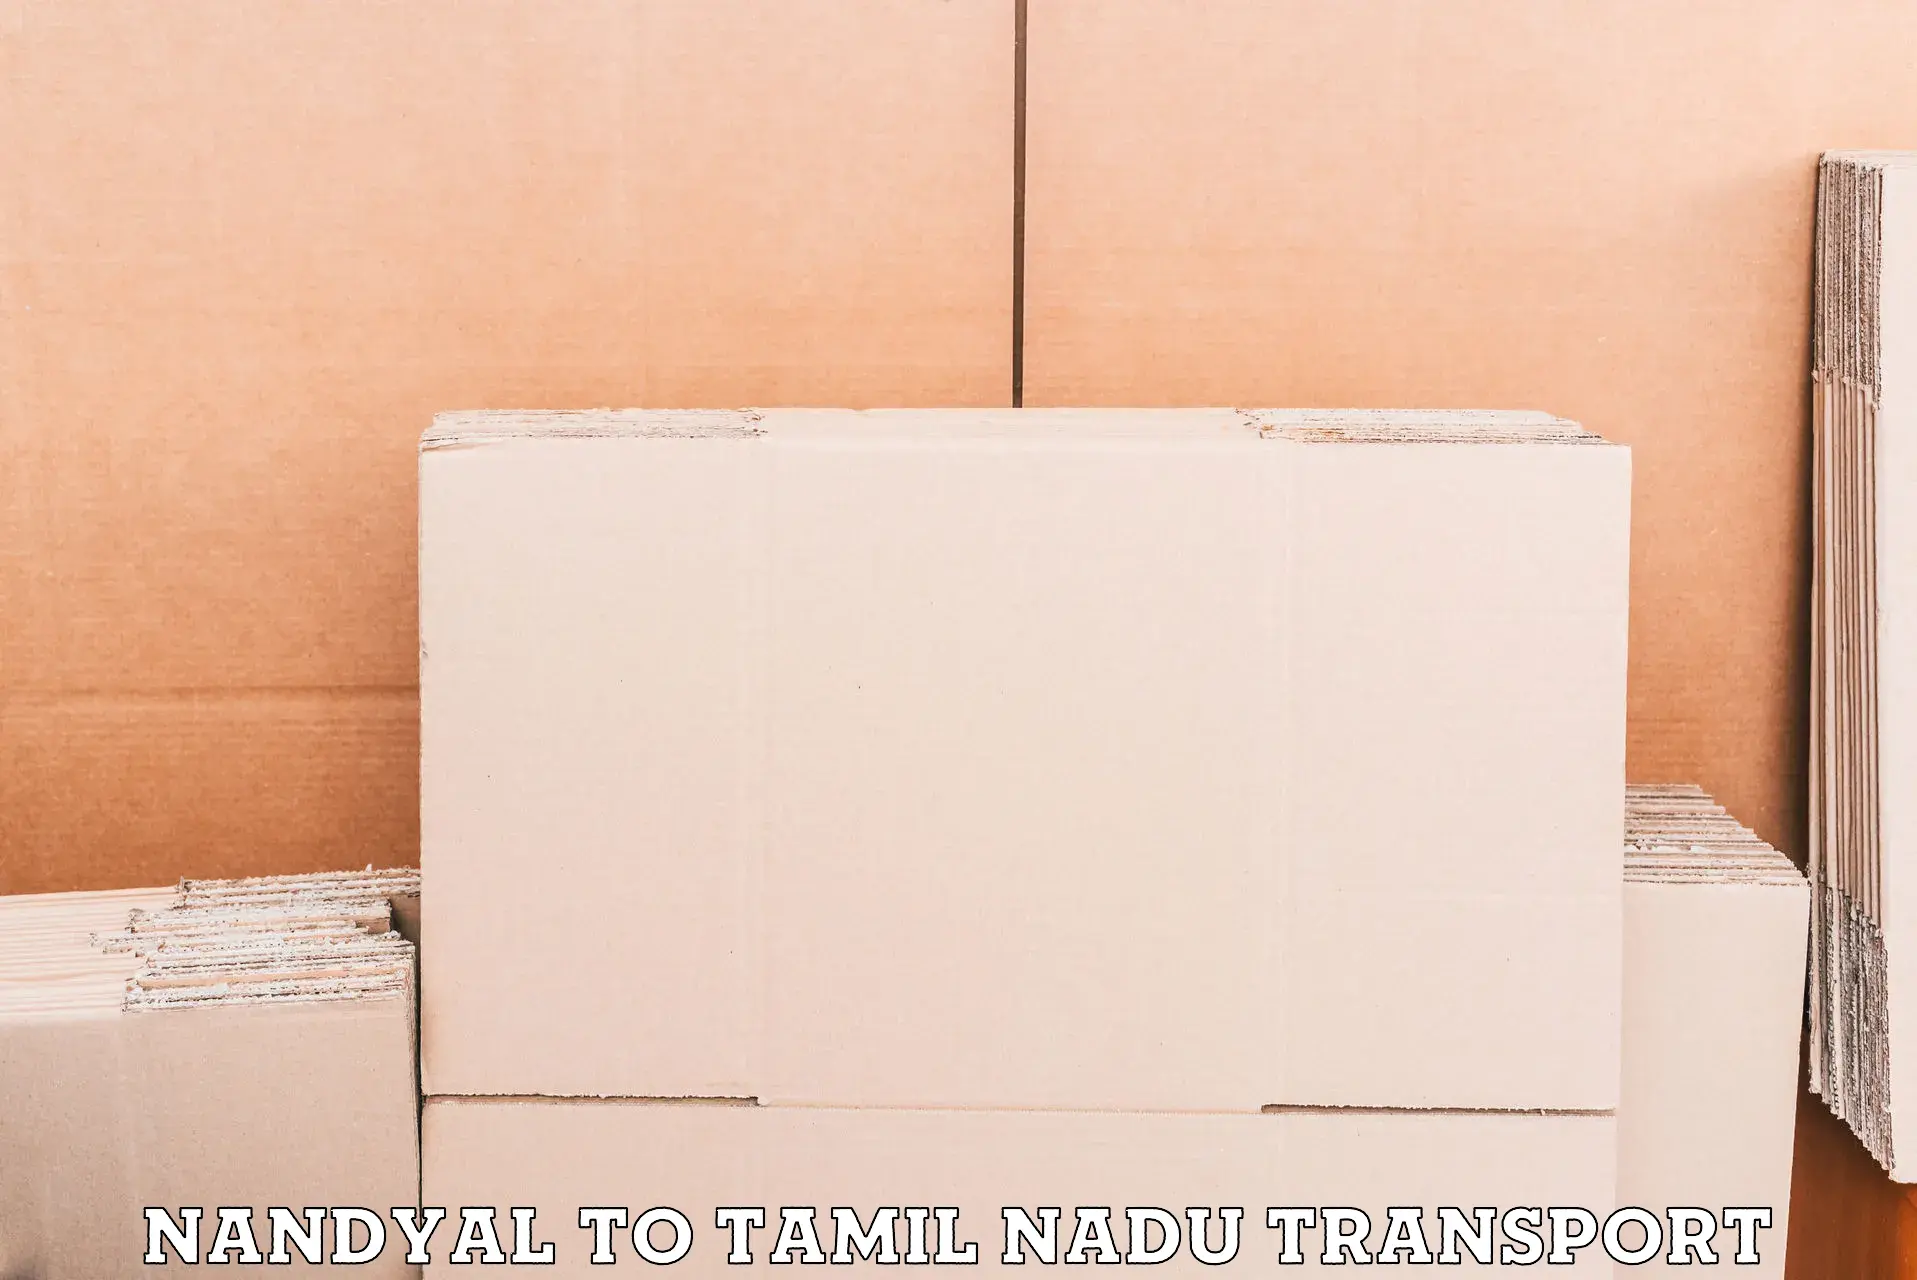 Container transport service Nandyal to Gudalur